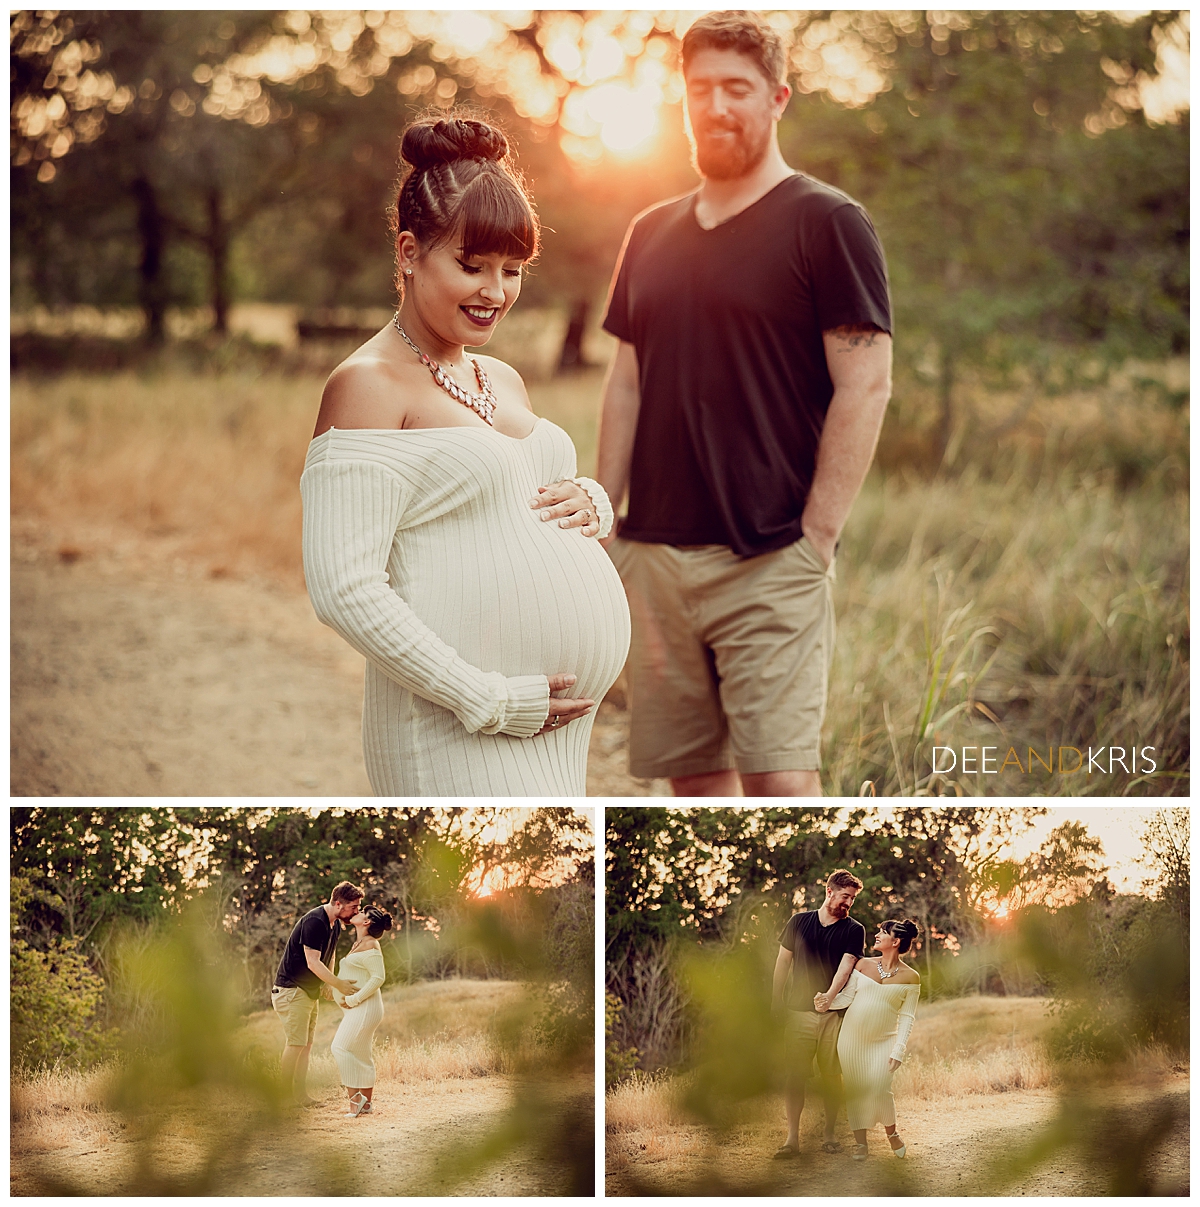 Three images of Margaret and Ryan. In the top image, Margaret stands in forefront and hugs her baby bump. Ryan in the background, looks on lovingly. In the bottom left image, we peek from behind a tree to capture our couple in a sweet kiss. The bottom right image is a view of our couple as they walk closely next to each other holding hands.